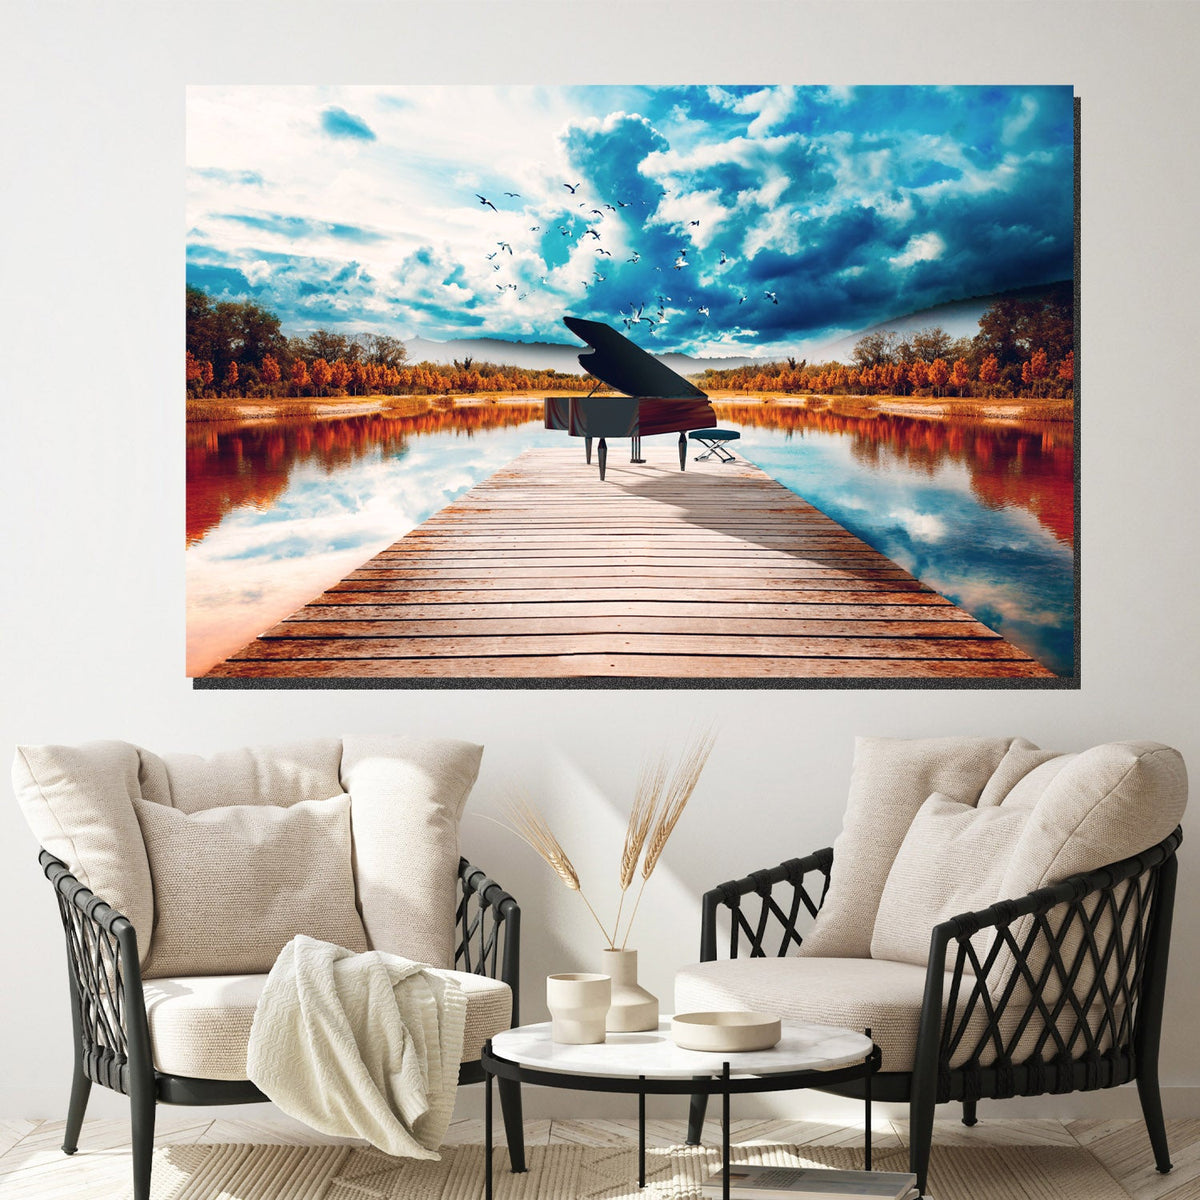 https://cdn.shopify.com/s/files/1/0387/9986/8044/products/PianoonthepierCanvasPrintStretched-3.jpg